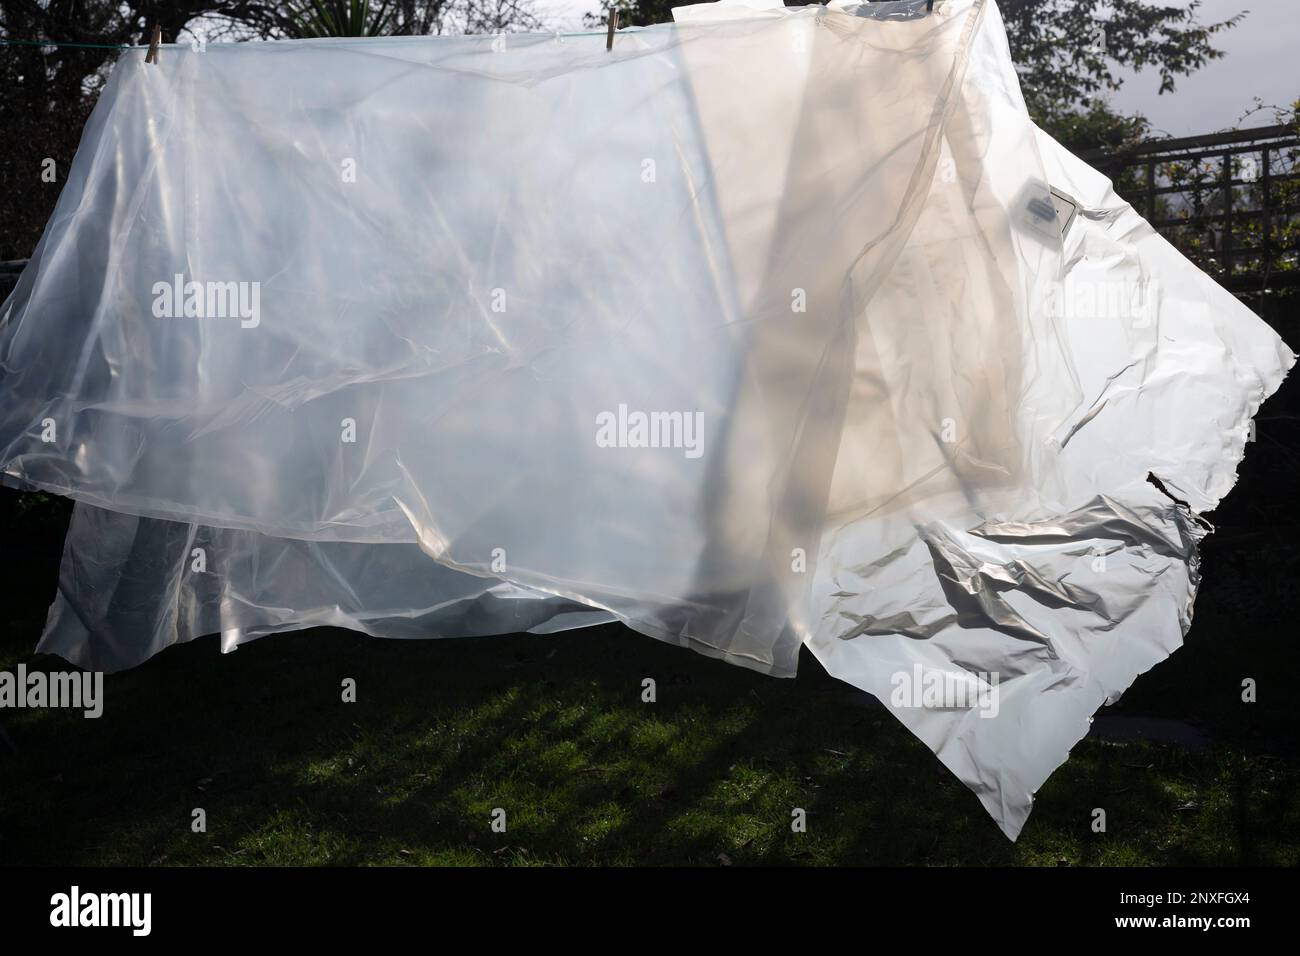 Plastic sheeting that's been pegged to a washing line for airing, has the appearance of an animal or beast of some some description - possibly a lion or other big cat - in a south London back garden, on 25th February 2023, in London, England. Stock Photo